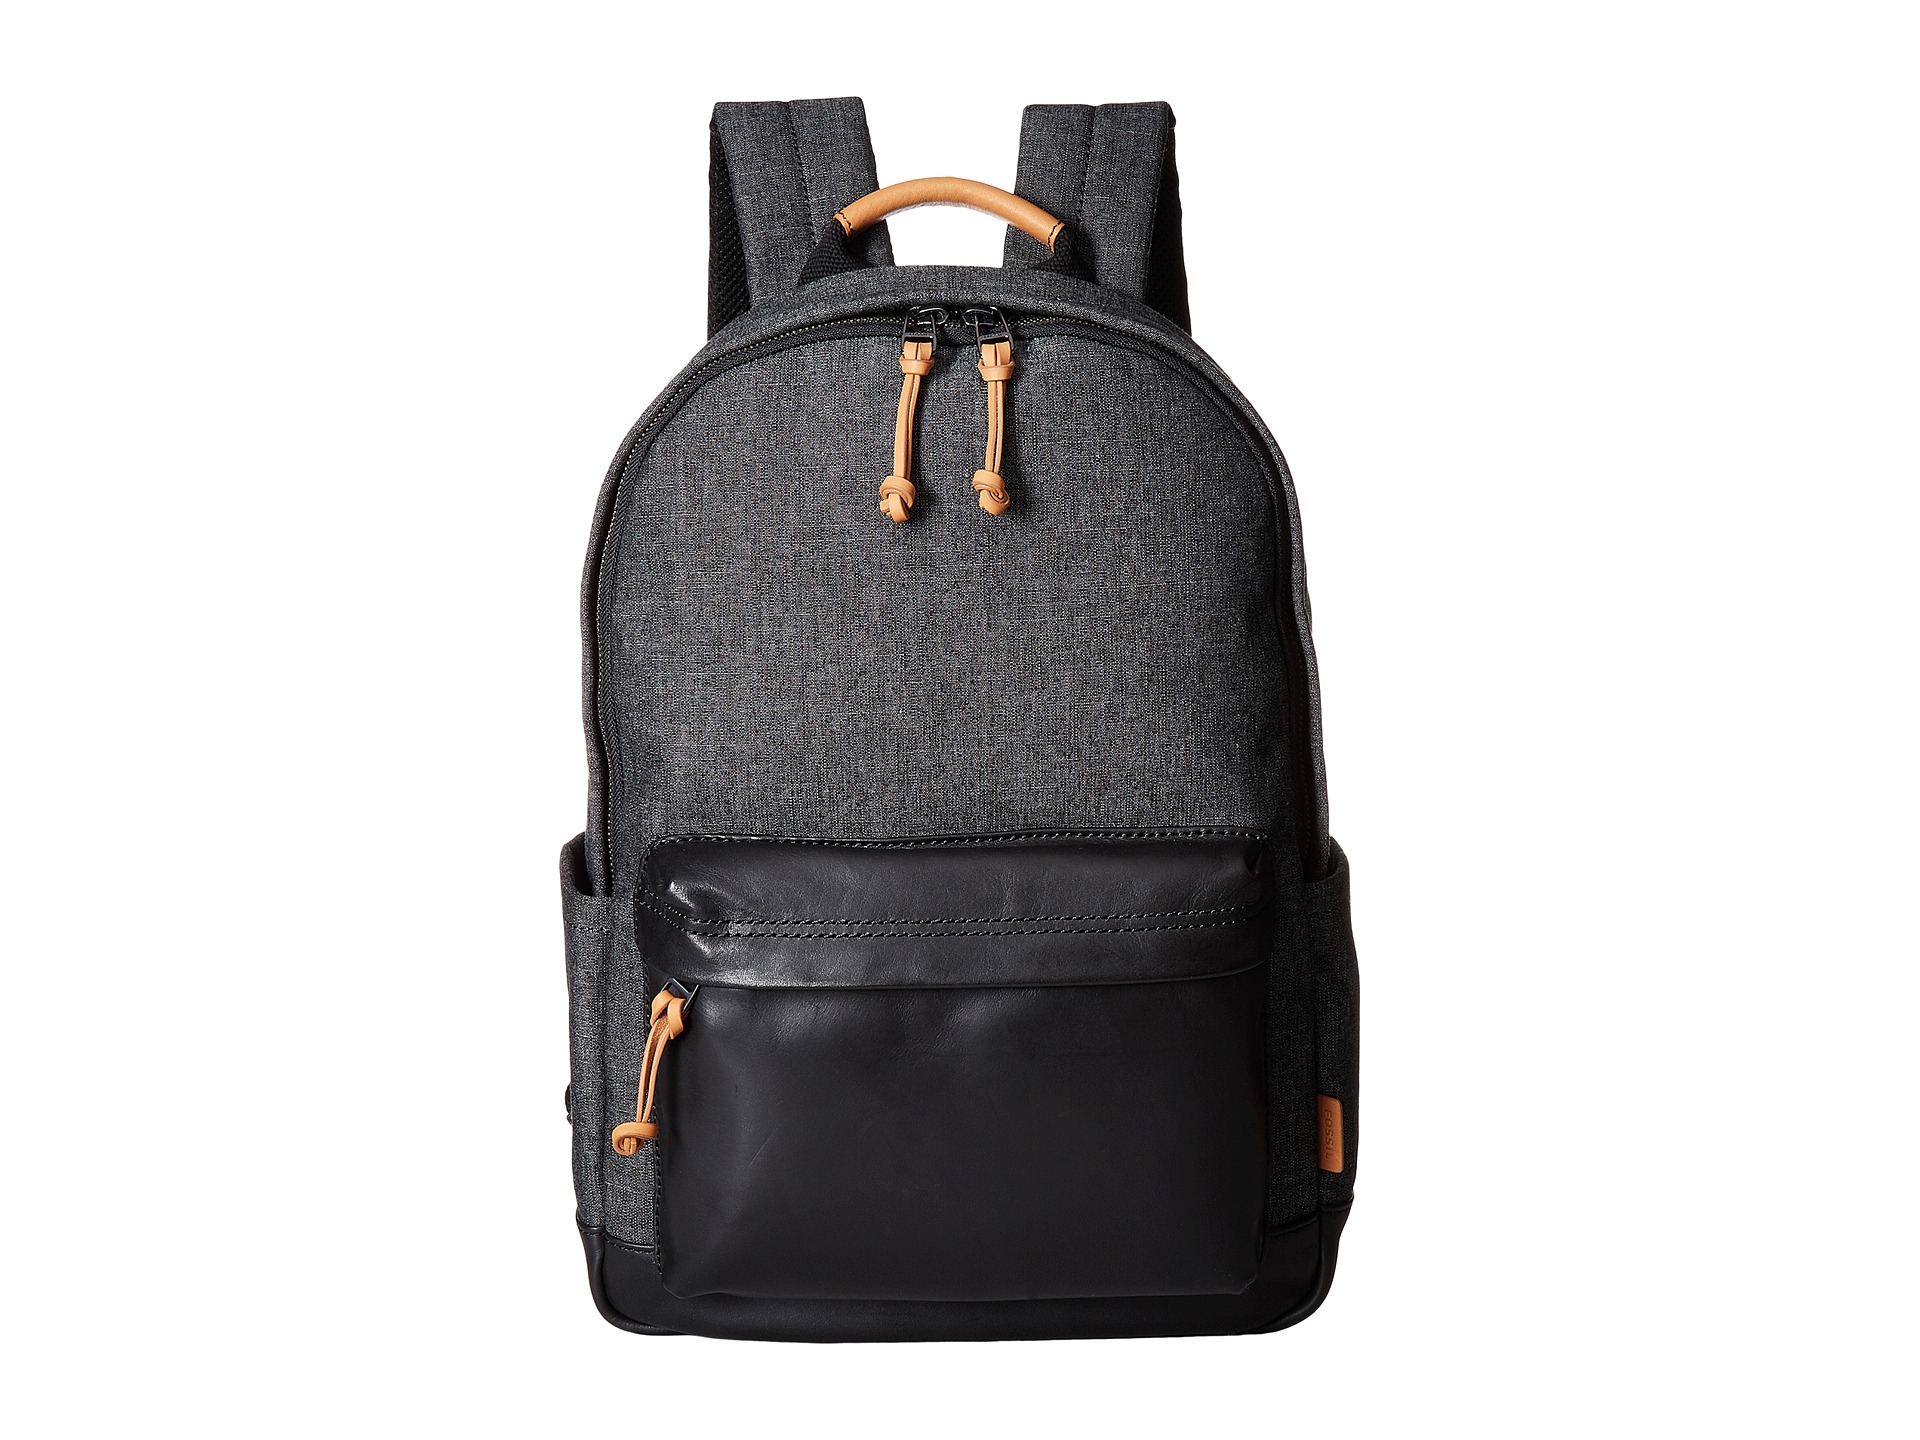 Fossil Defender Backpack at Zappos.com